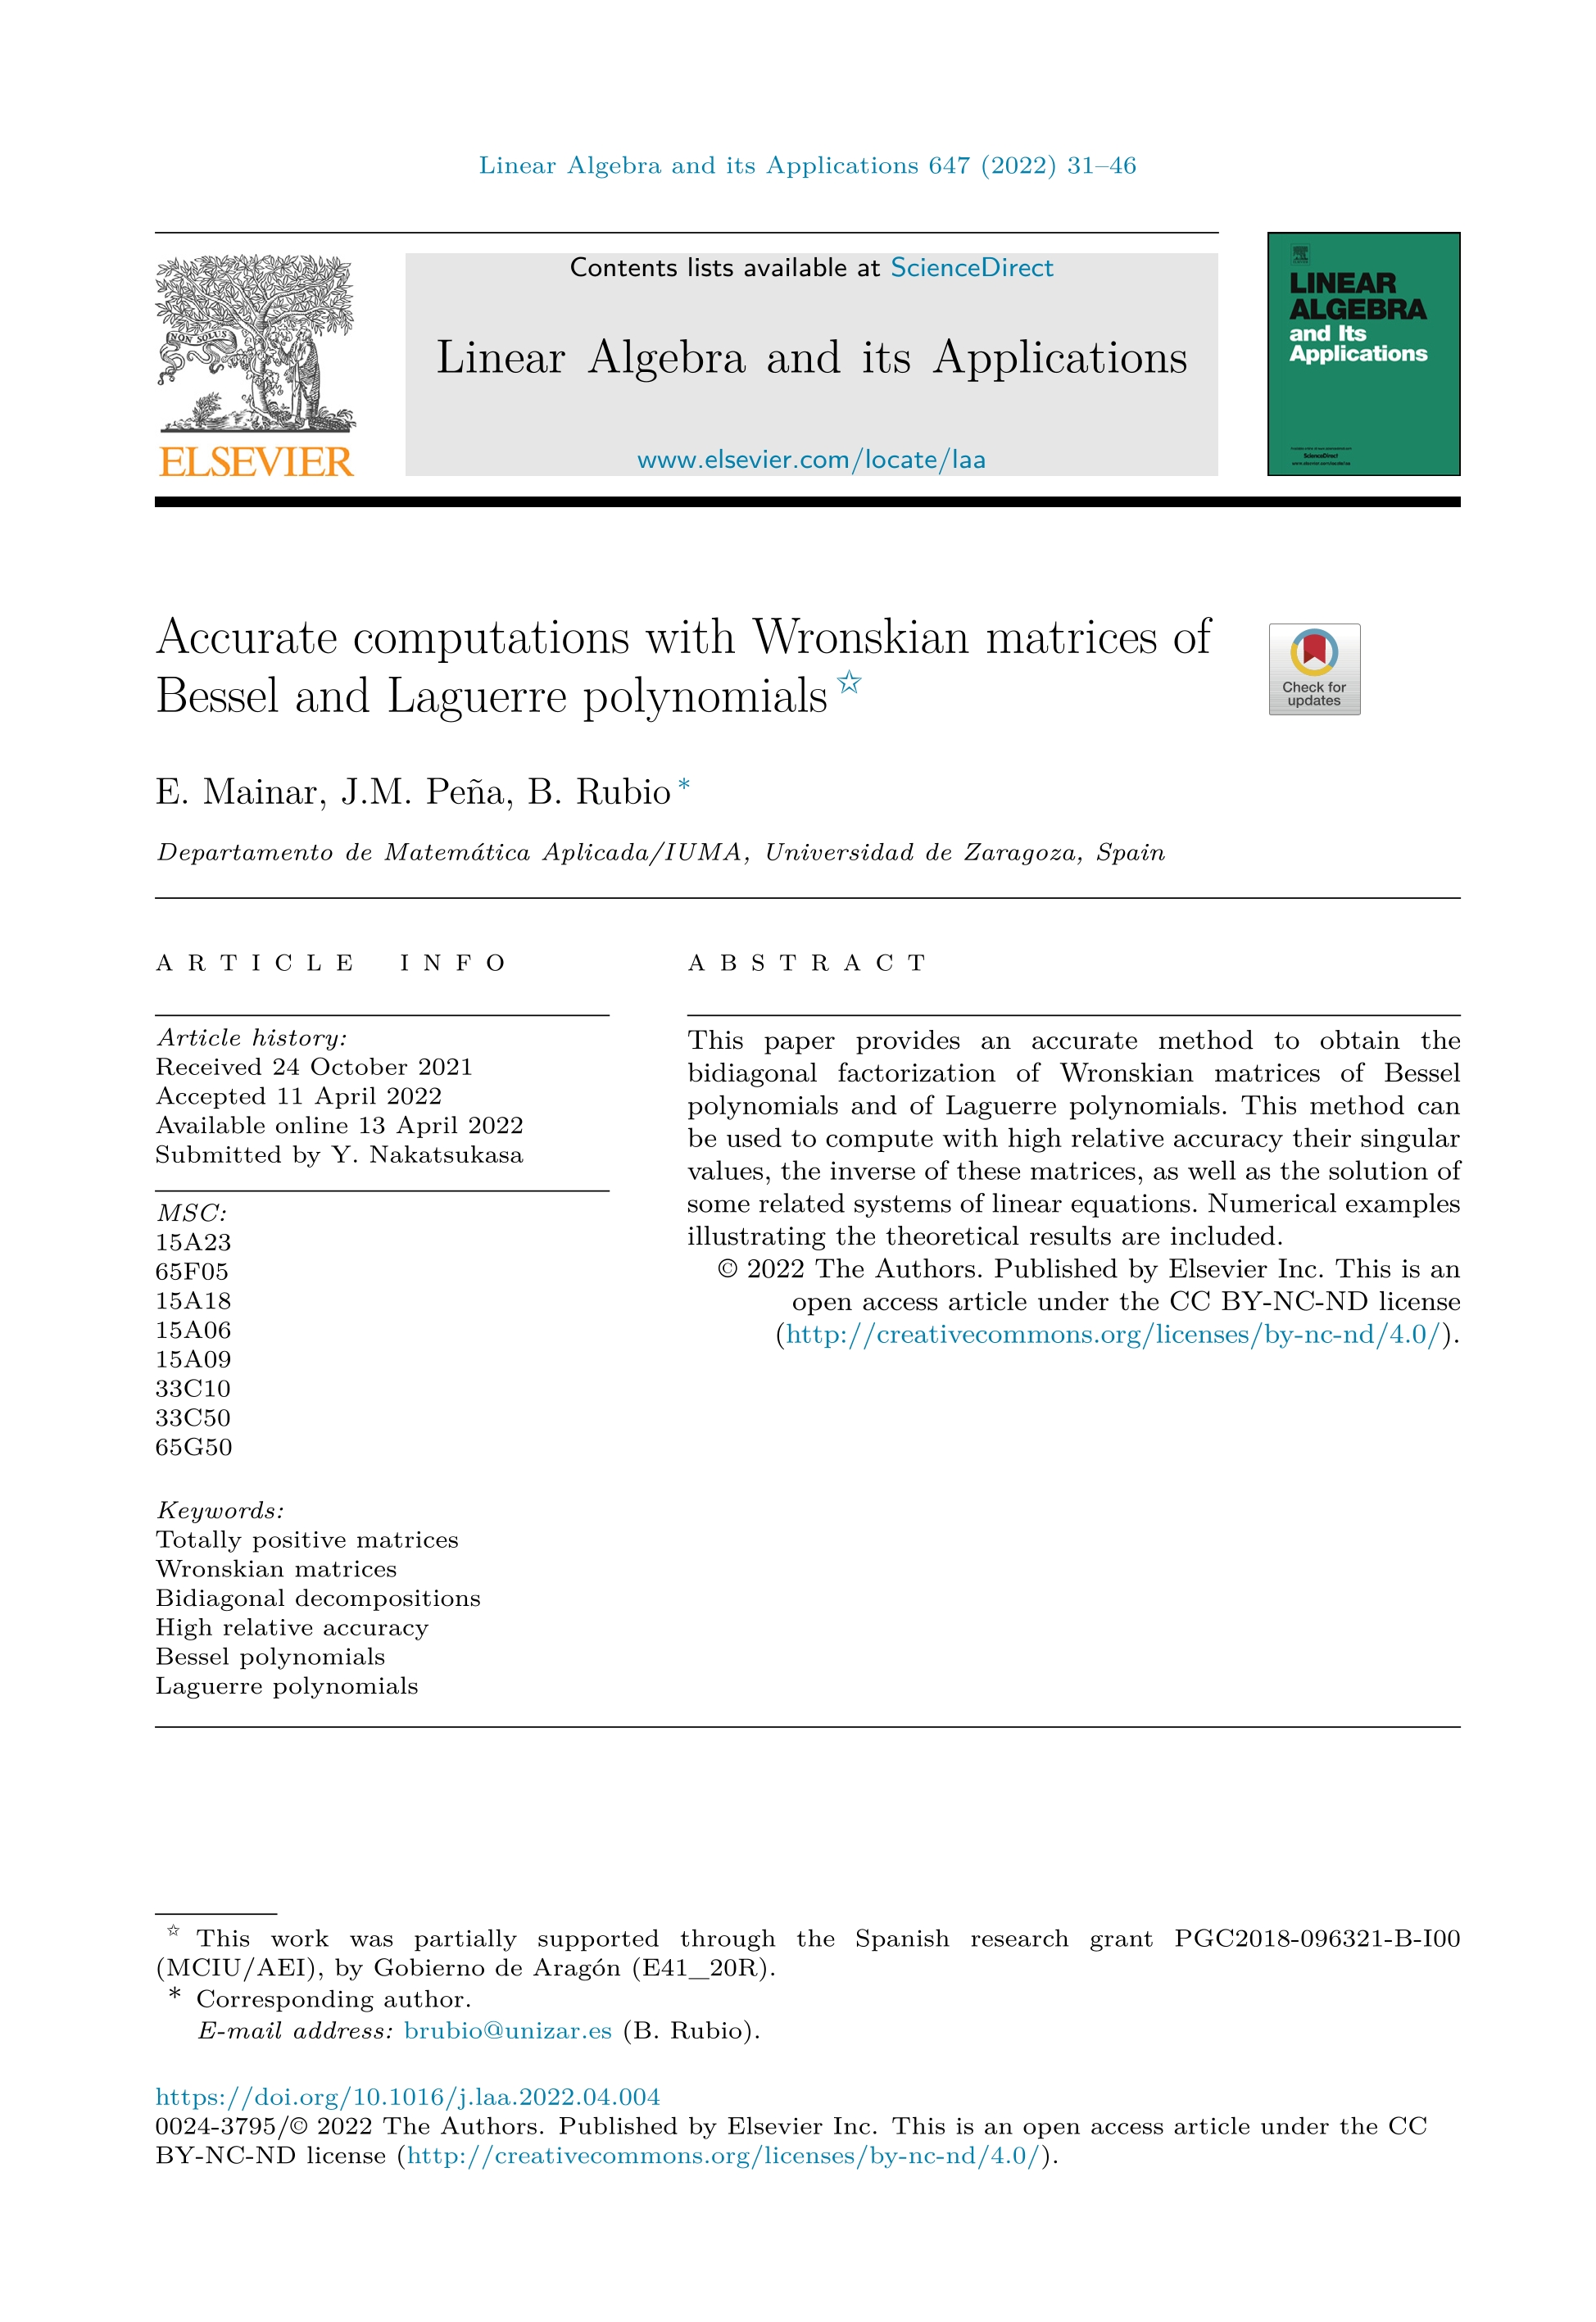 Accurate computations with Wronskian matrices of Bessel and Laguerre polynomials